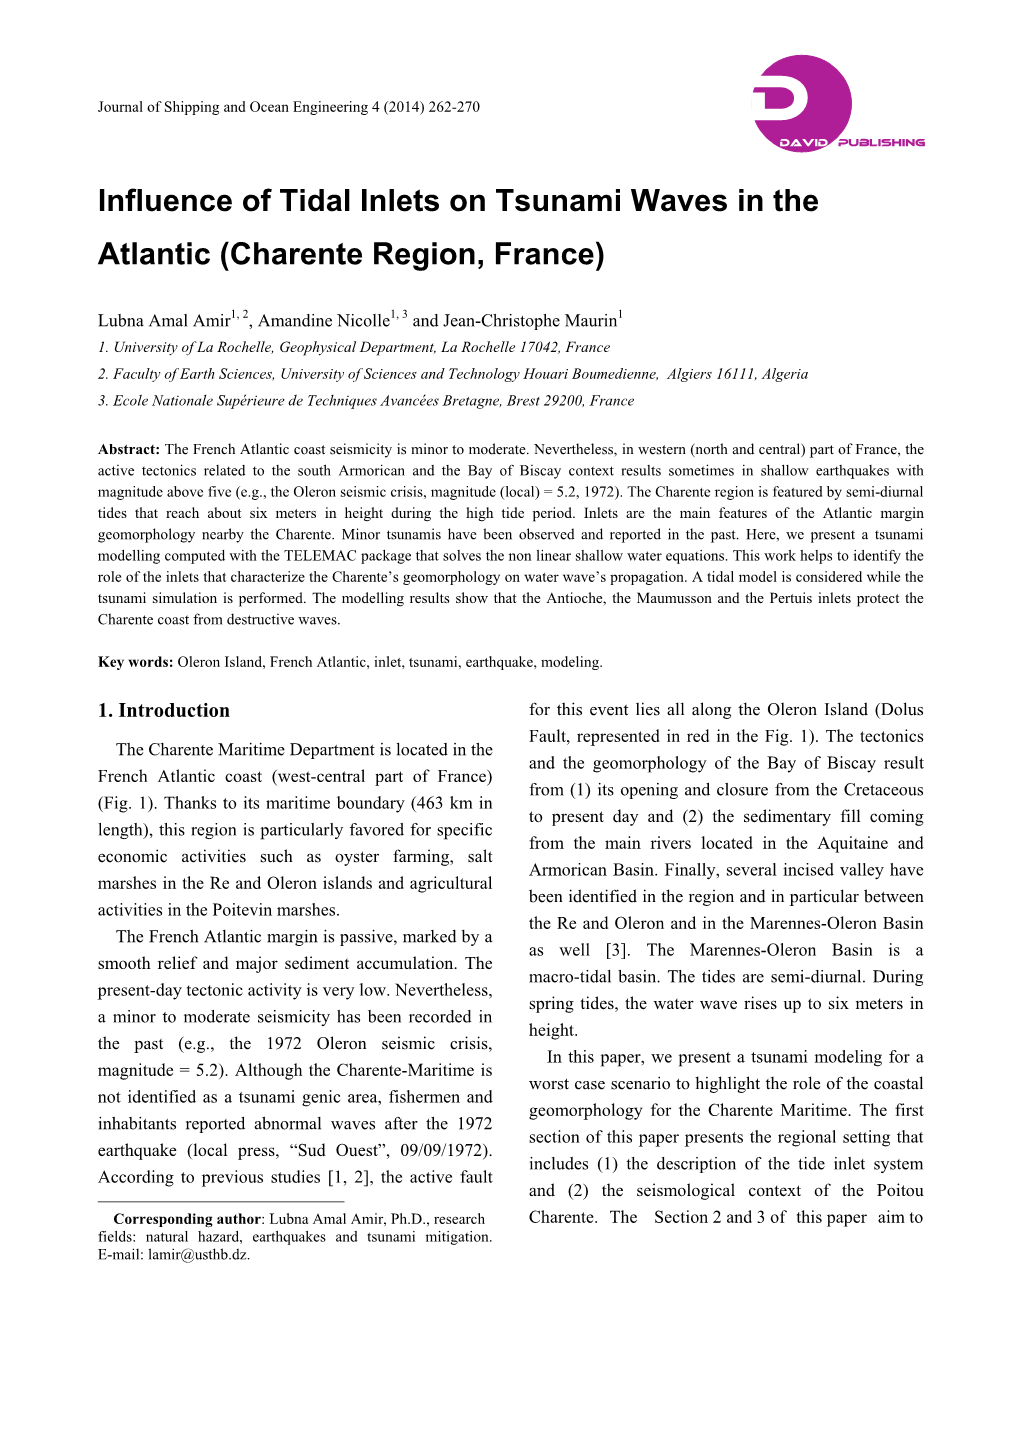 Influence of Tidal Inlets on Tsunami Waves in the Atlantic (Charente Region, France)